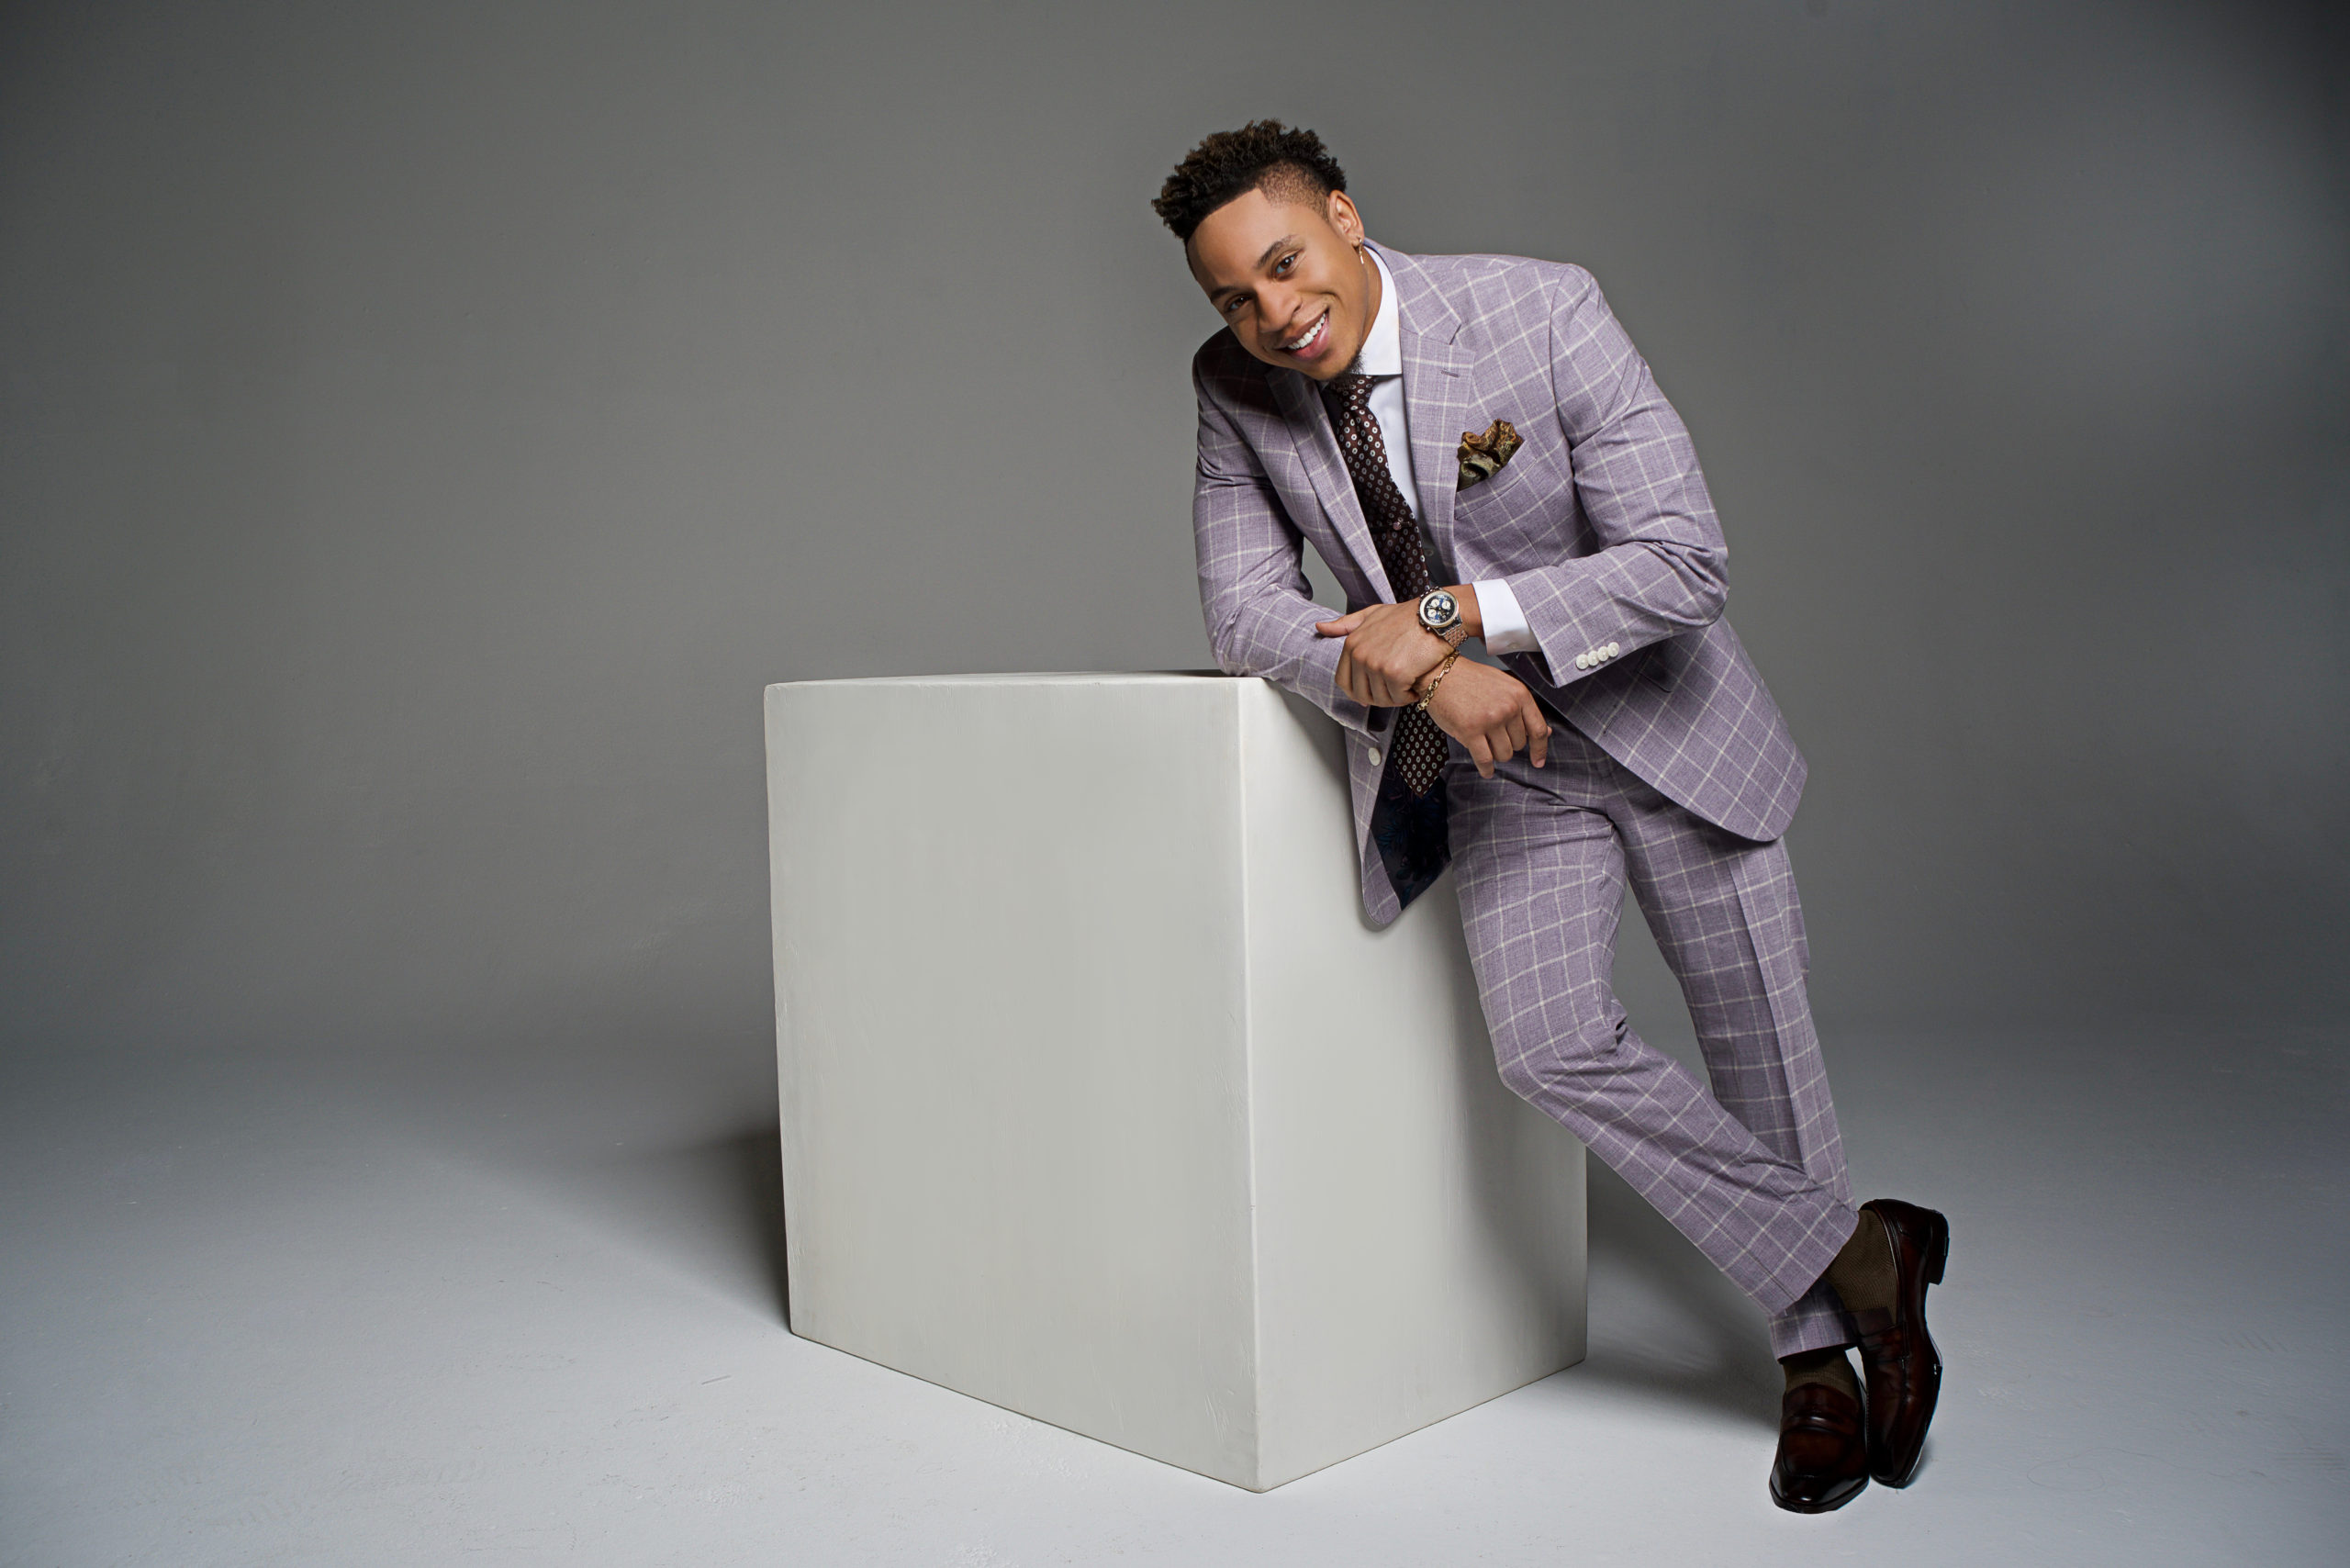 Rotimi is the New Face of Sean John's S/S 2020 Tailored Suit Campaign